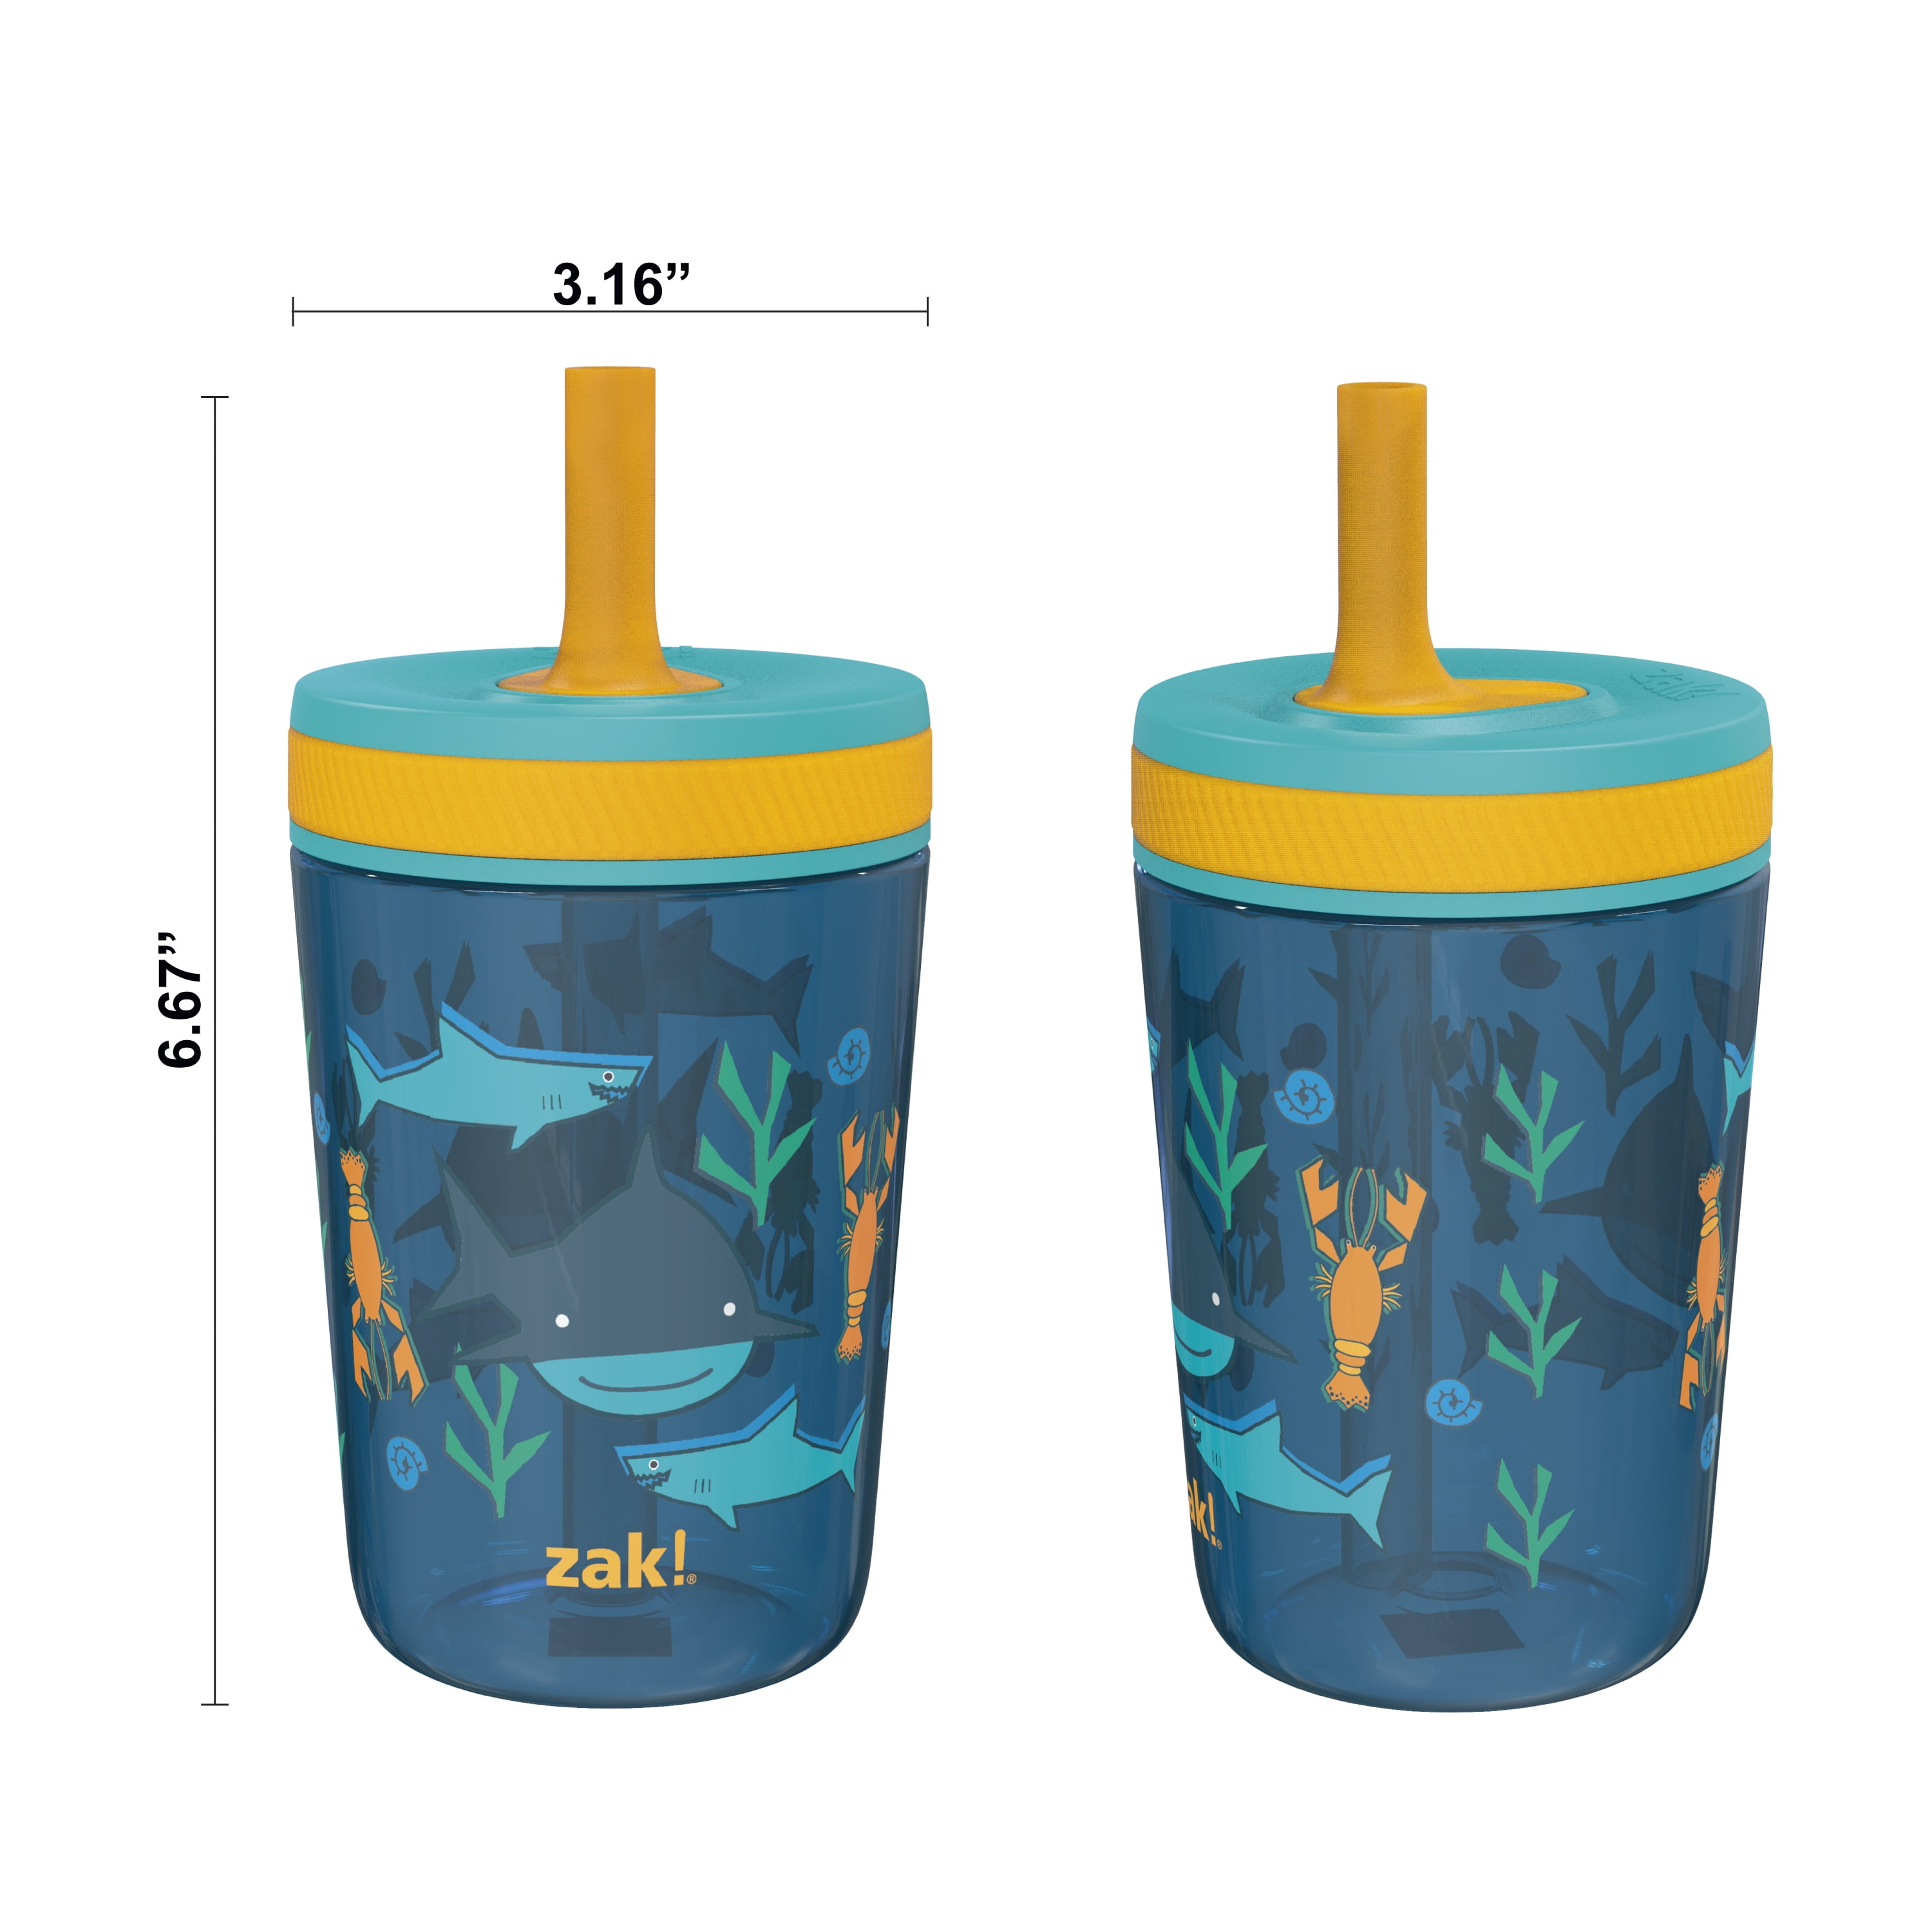  Zak Designs Kelso 15 oz Tumbler Set, (Shells) Non-BPA  Leak-Proof Screw-On Lid with Straw Made of Durable Plastic and Silicone,  Perfect Baby Cup Bundle for Kids (2pc Set) : Baby